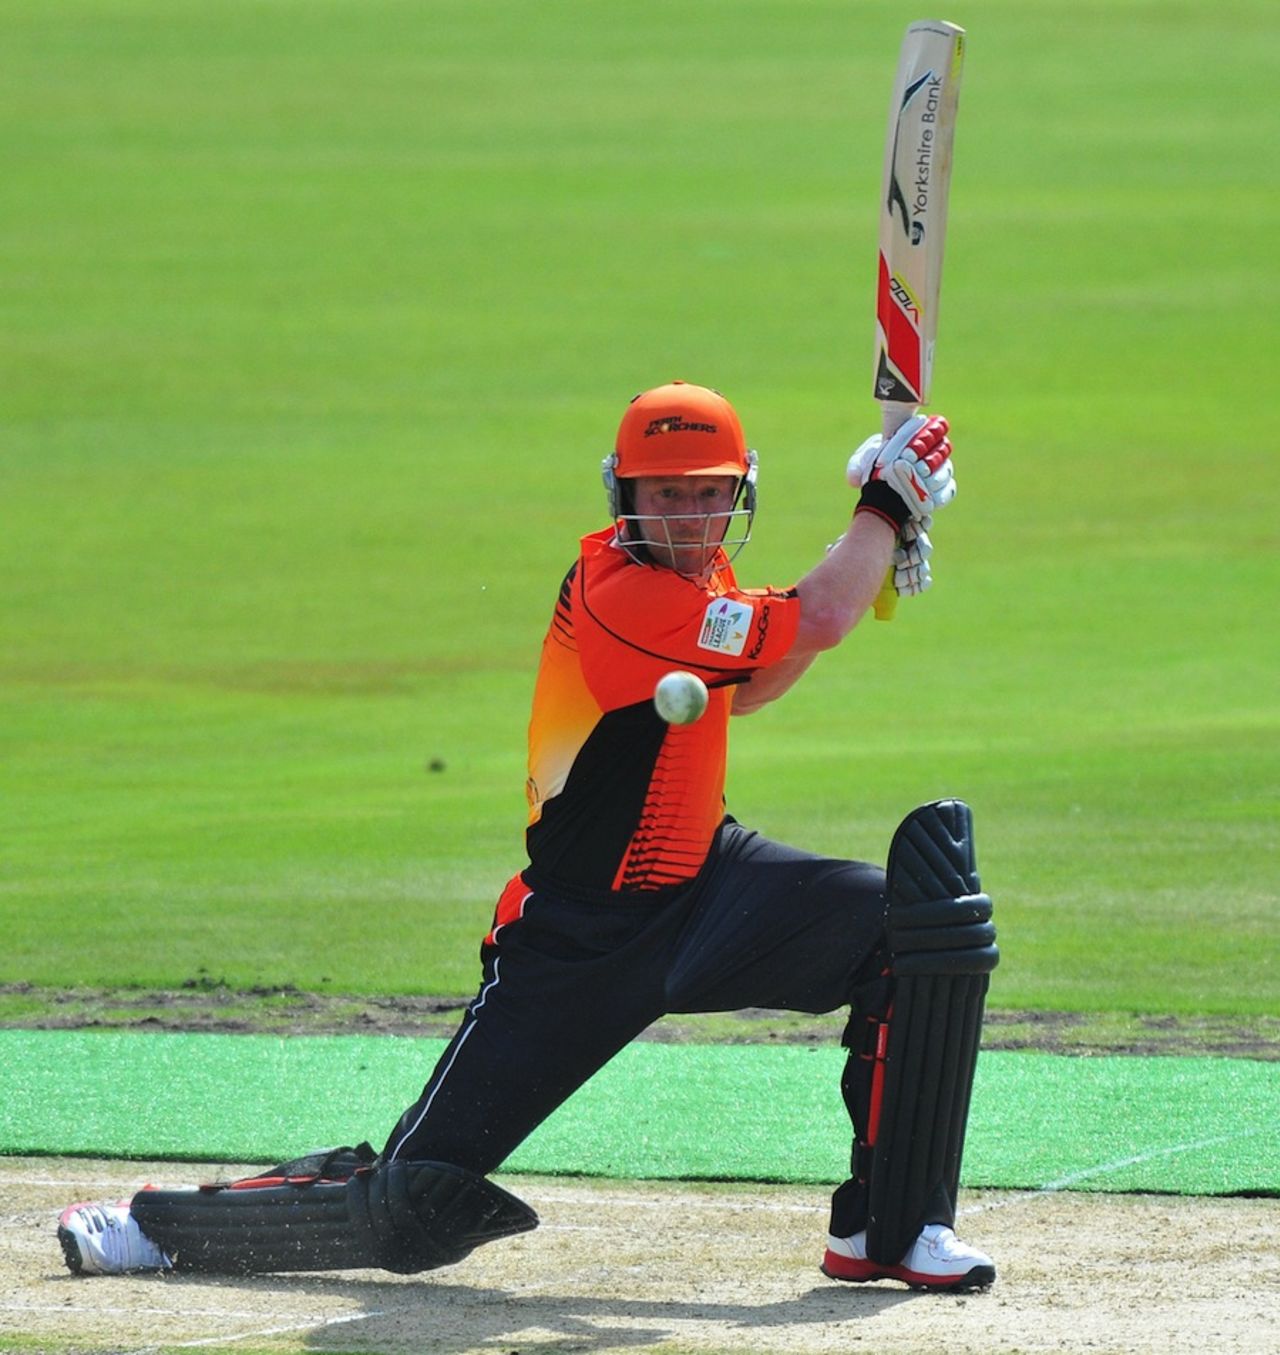 Paul Collingwood square drives during his first appearance in the tournament, Auckland Aces v Perth Scorchers, Champions League T20, Centurion, October 23, 2012